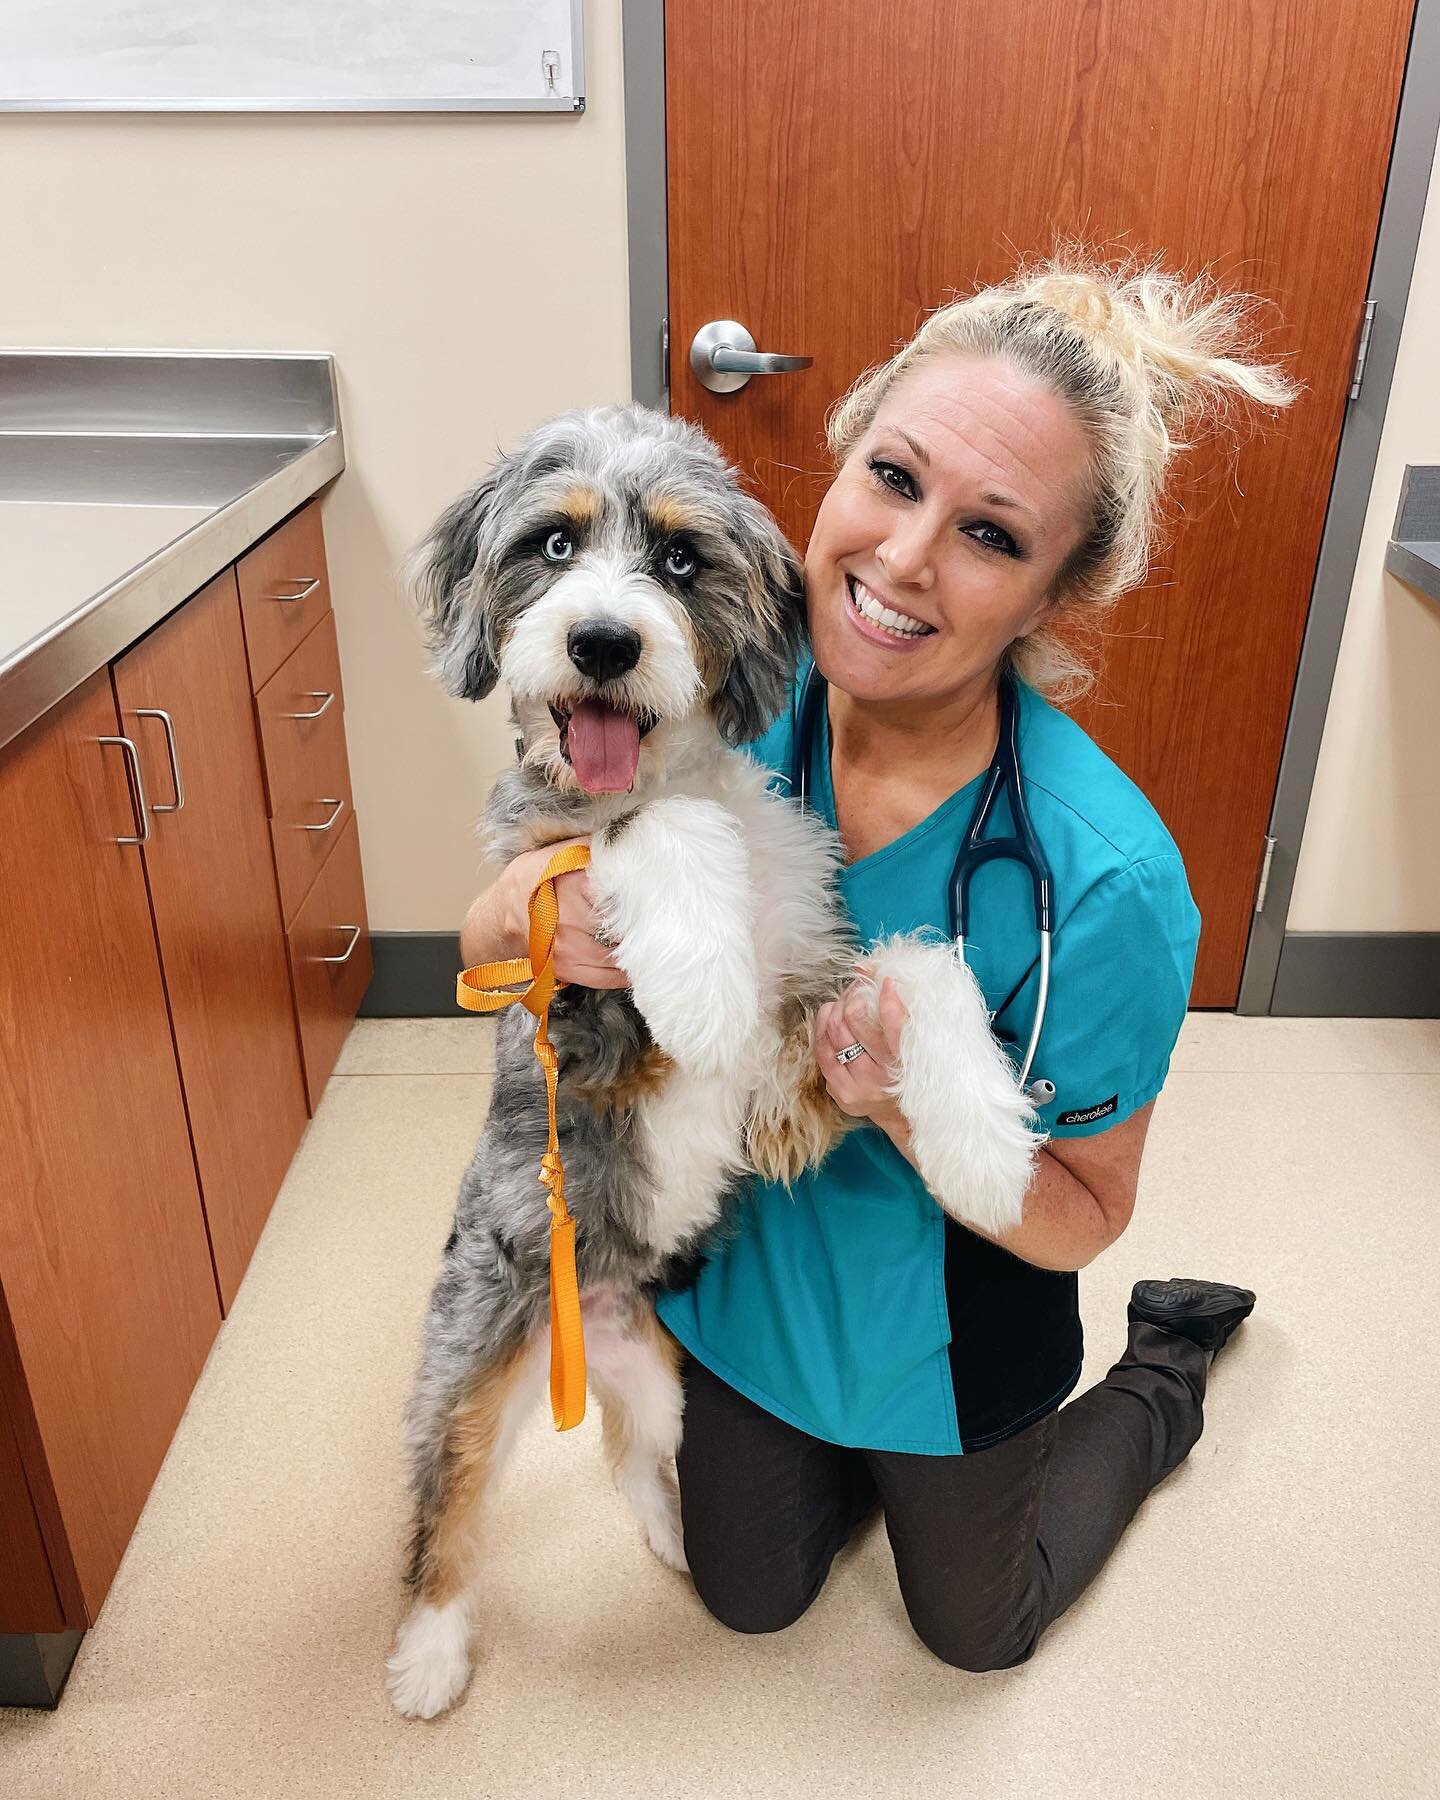 HAPPY WEDNESDAY! 🐶🐱

Just a Dr. Pearman appreciation post! Did you know Dr. Pearman use to be a vet at a zoo in Oregon? She is happy to see exotics such as reptiles, pocket pets and rabbits. She loves spending time with her family, traveling, readi